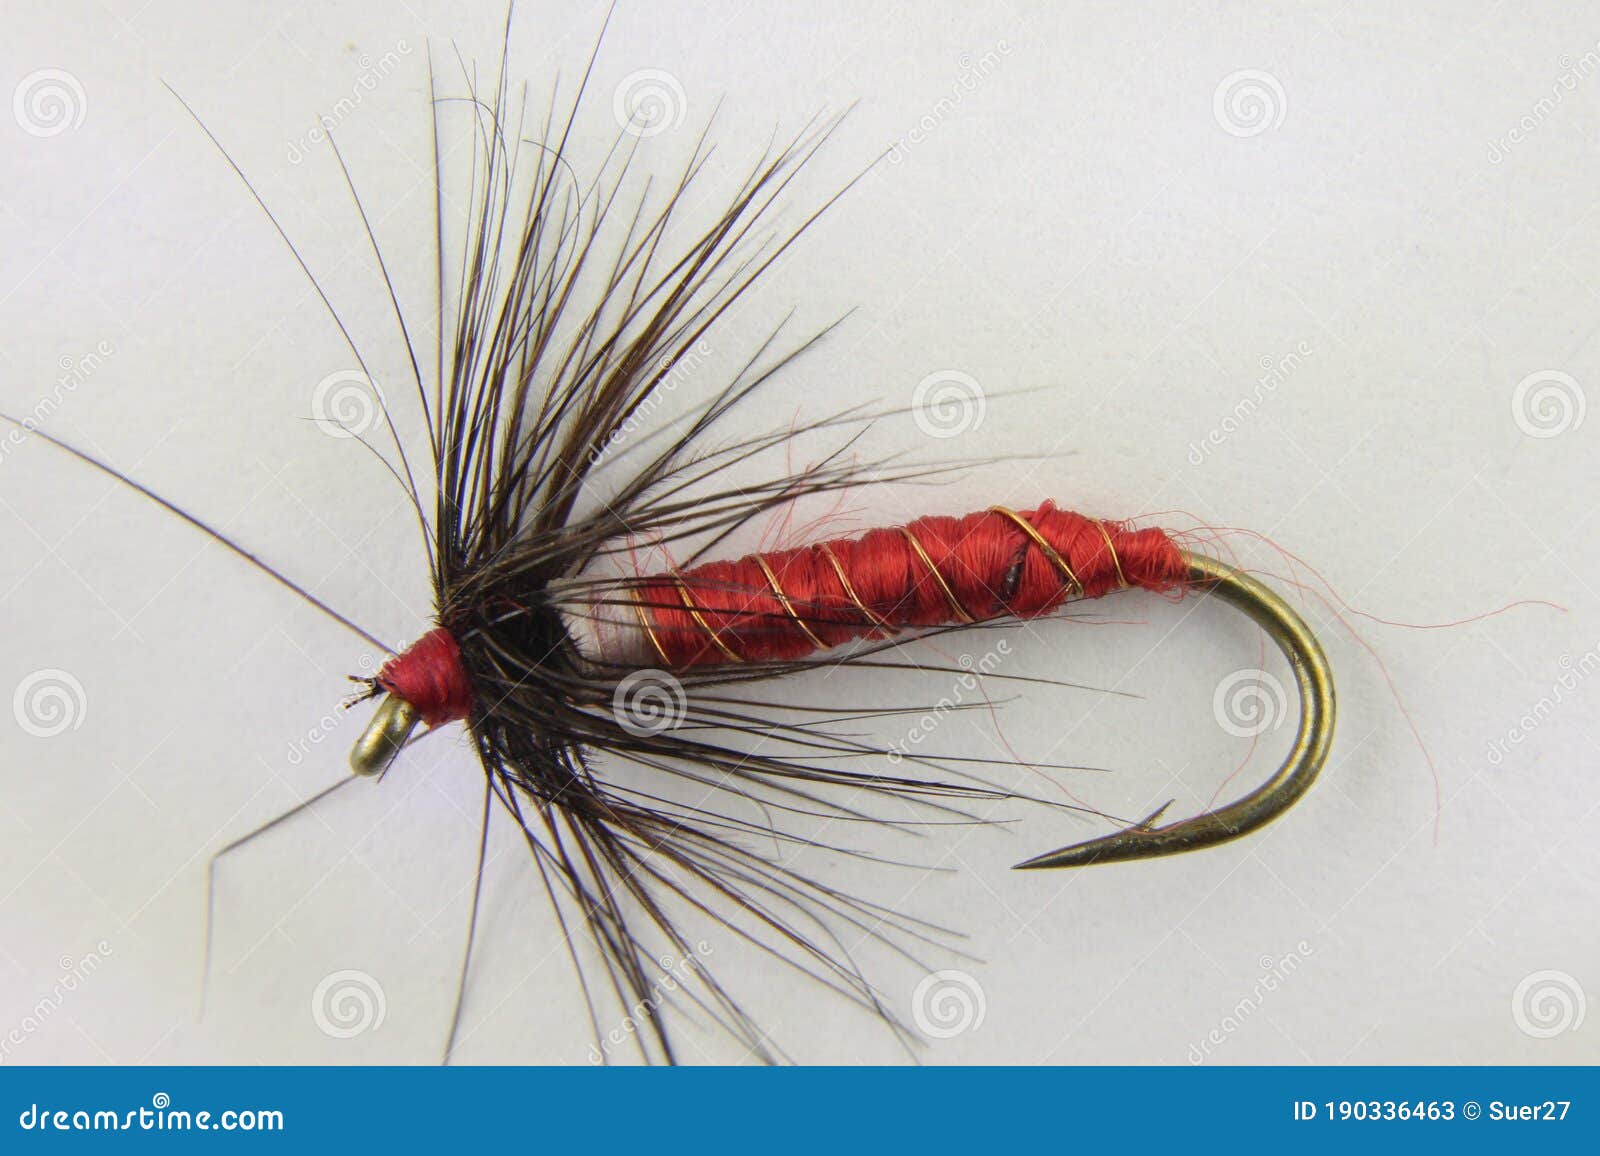 Home Made Fishing Lure with Barbed Hook for Fly Fishing Stock Image - Image  of fish, home: 190336463